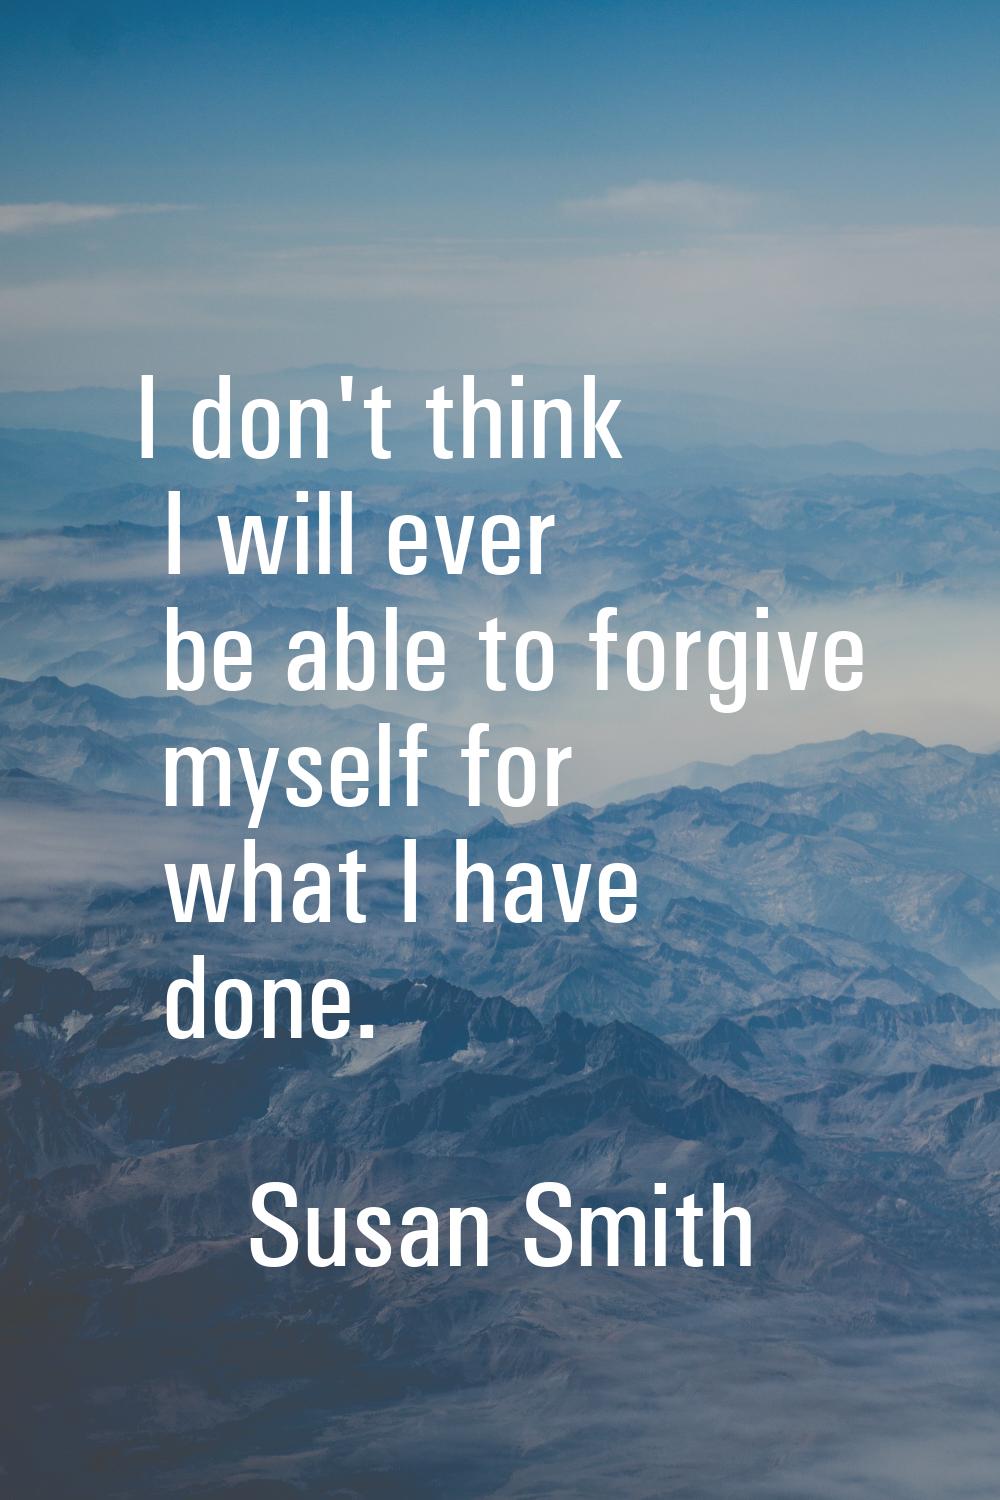 I don't think I will ever be able to forgive myself for what I have done.